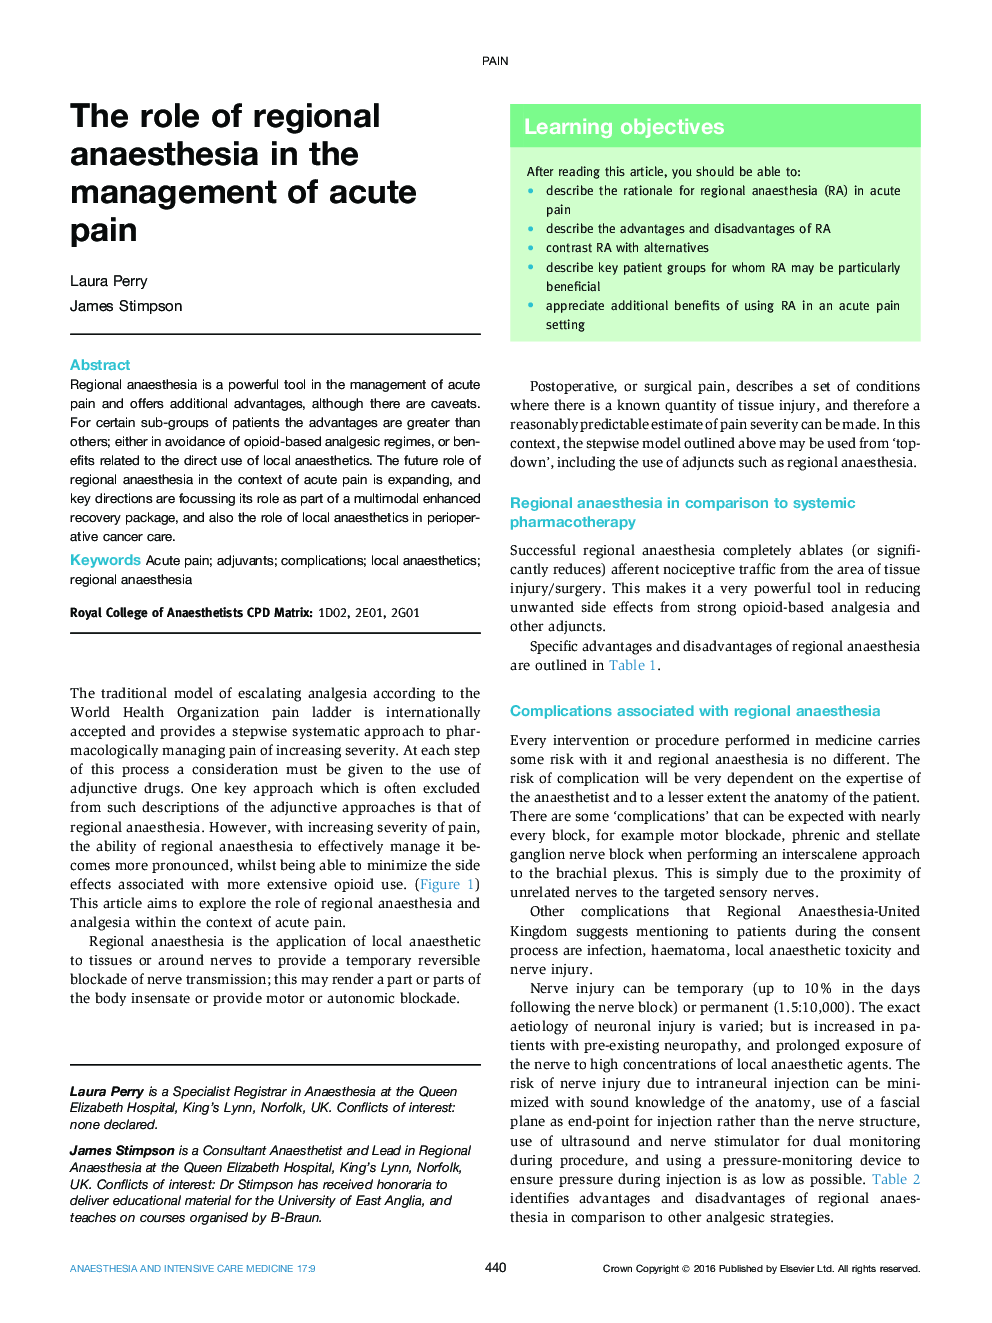 The role of regional anaesthesia in the management of acute pain